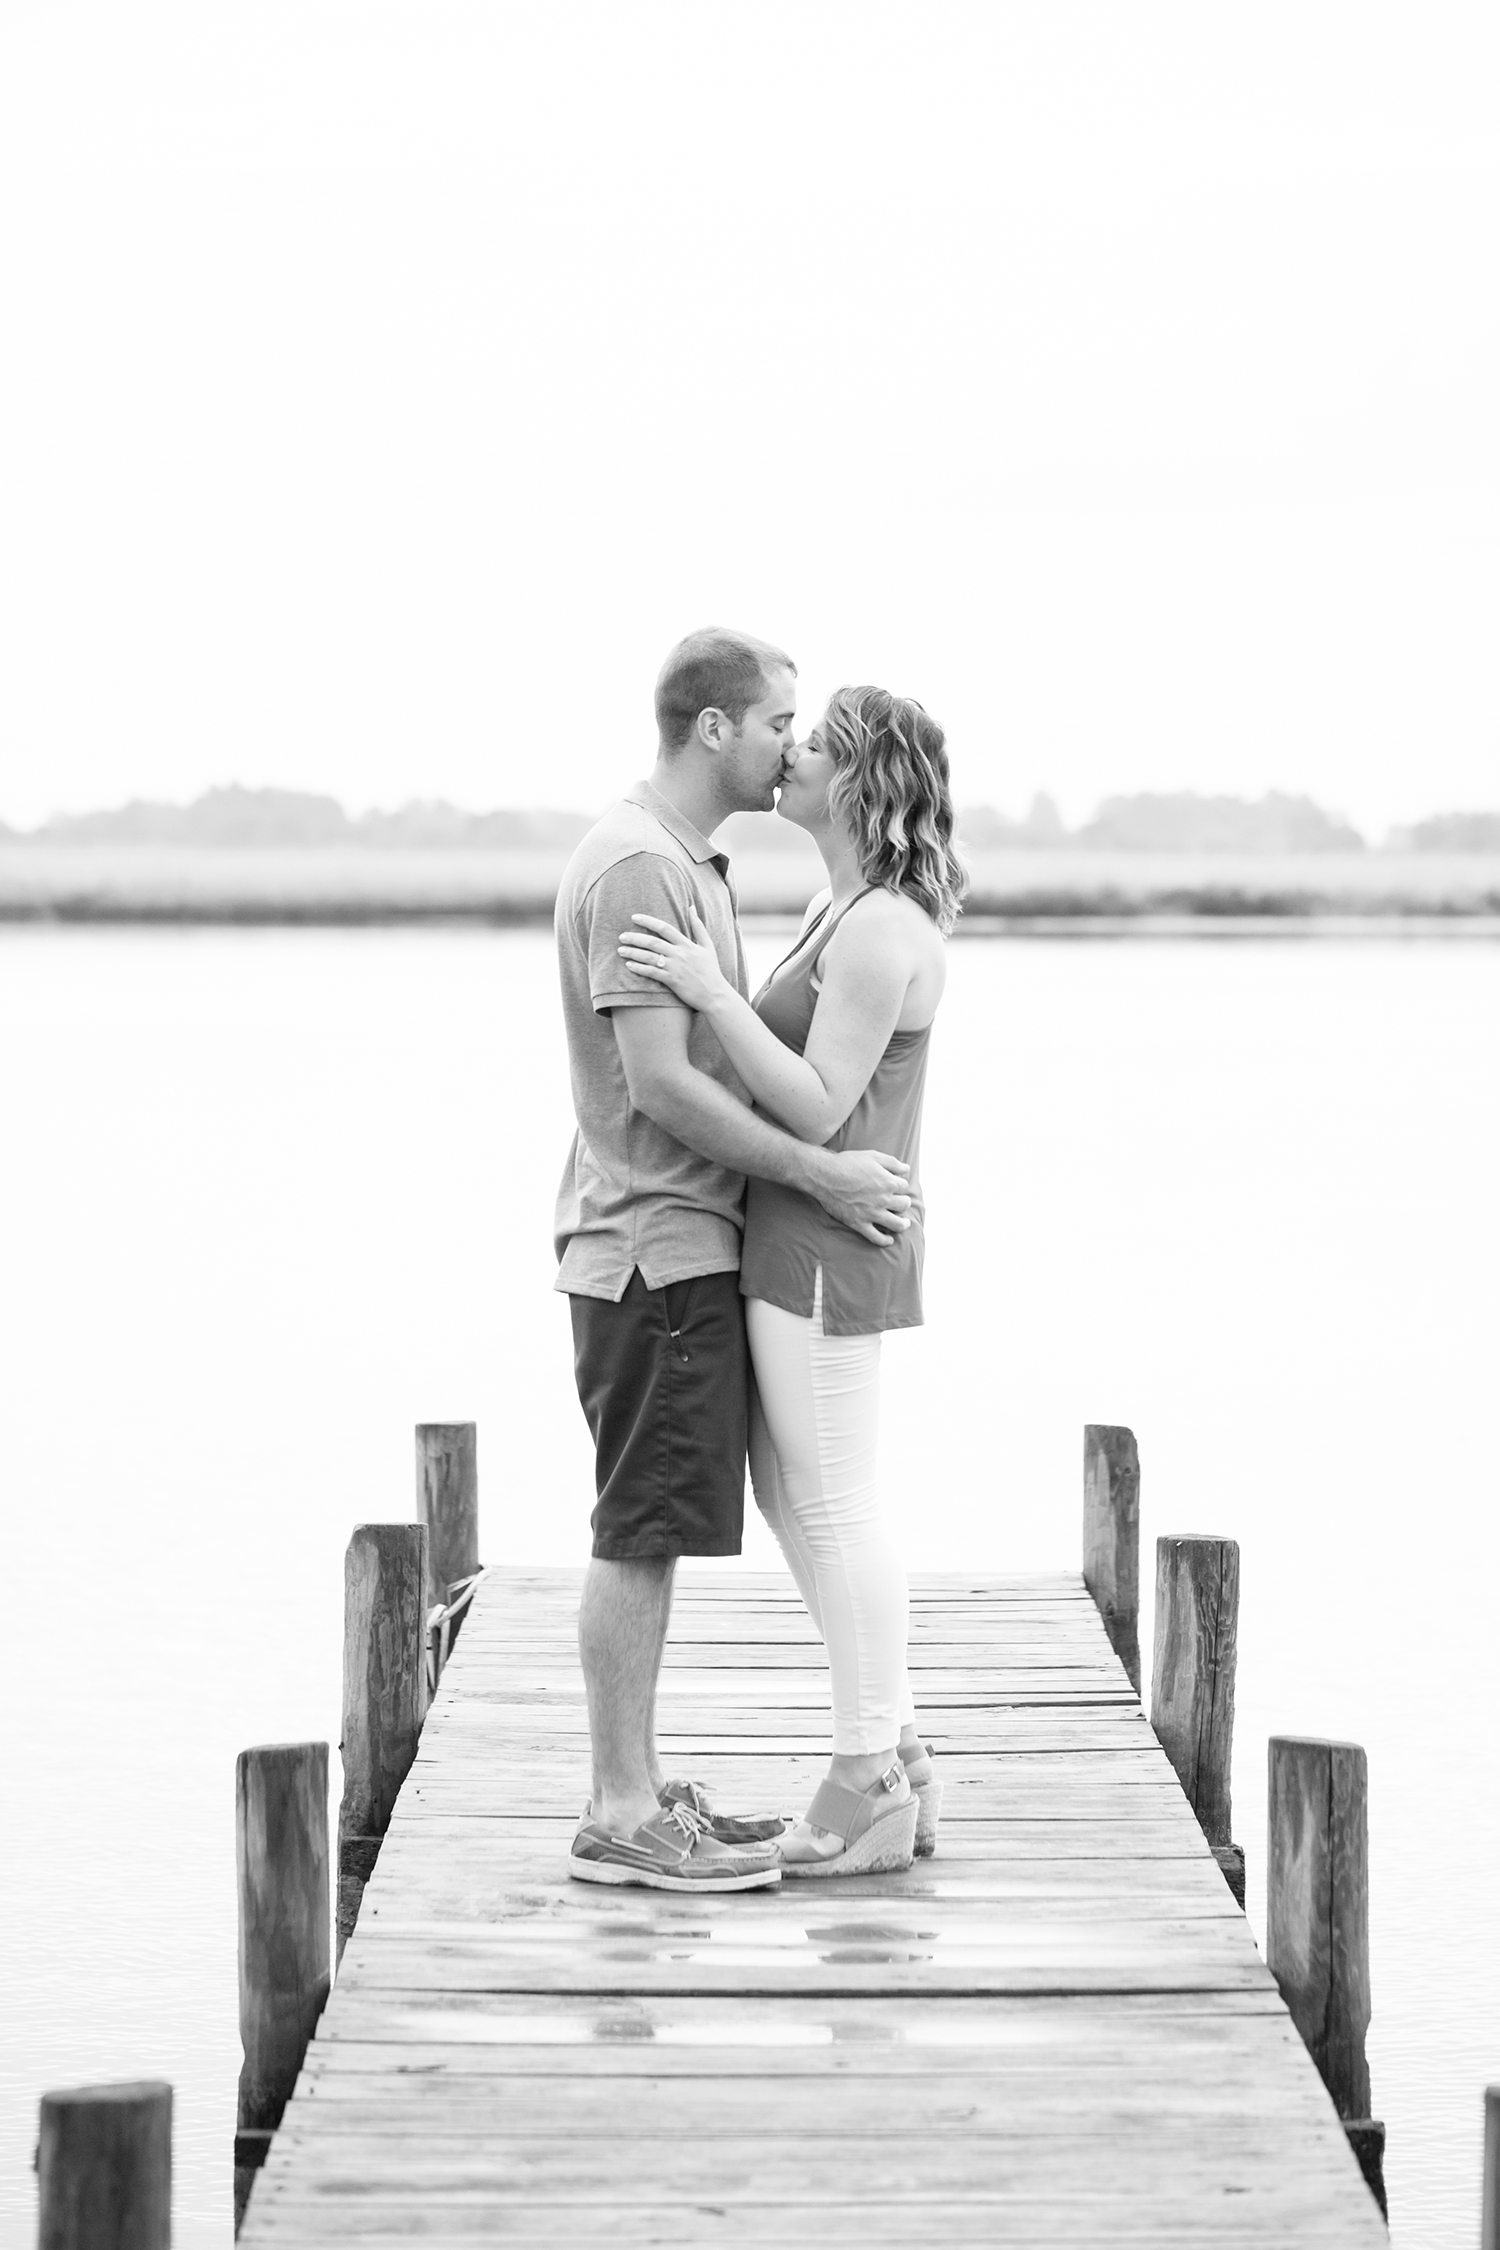 Justine  Jeremys Engagement Photos at Cousiac Manor - Image Property of www.j-dphoto.com